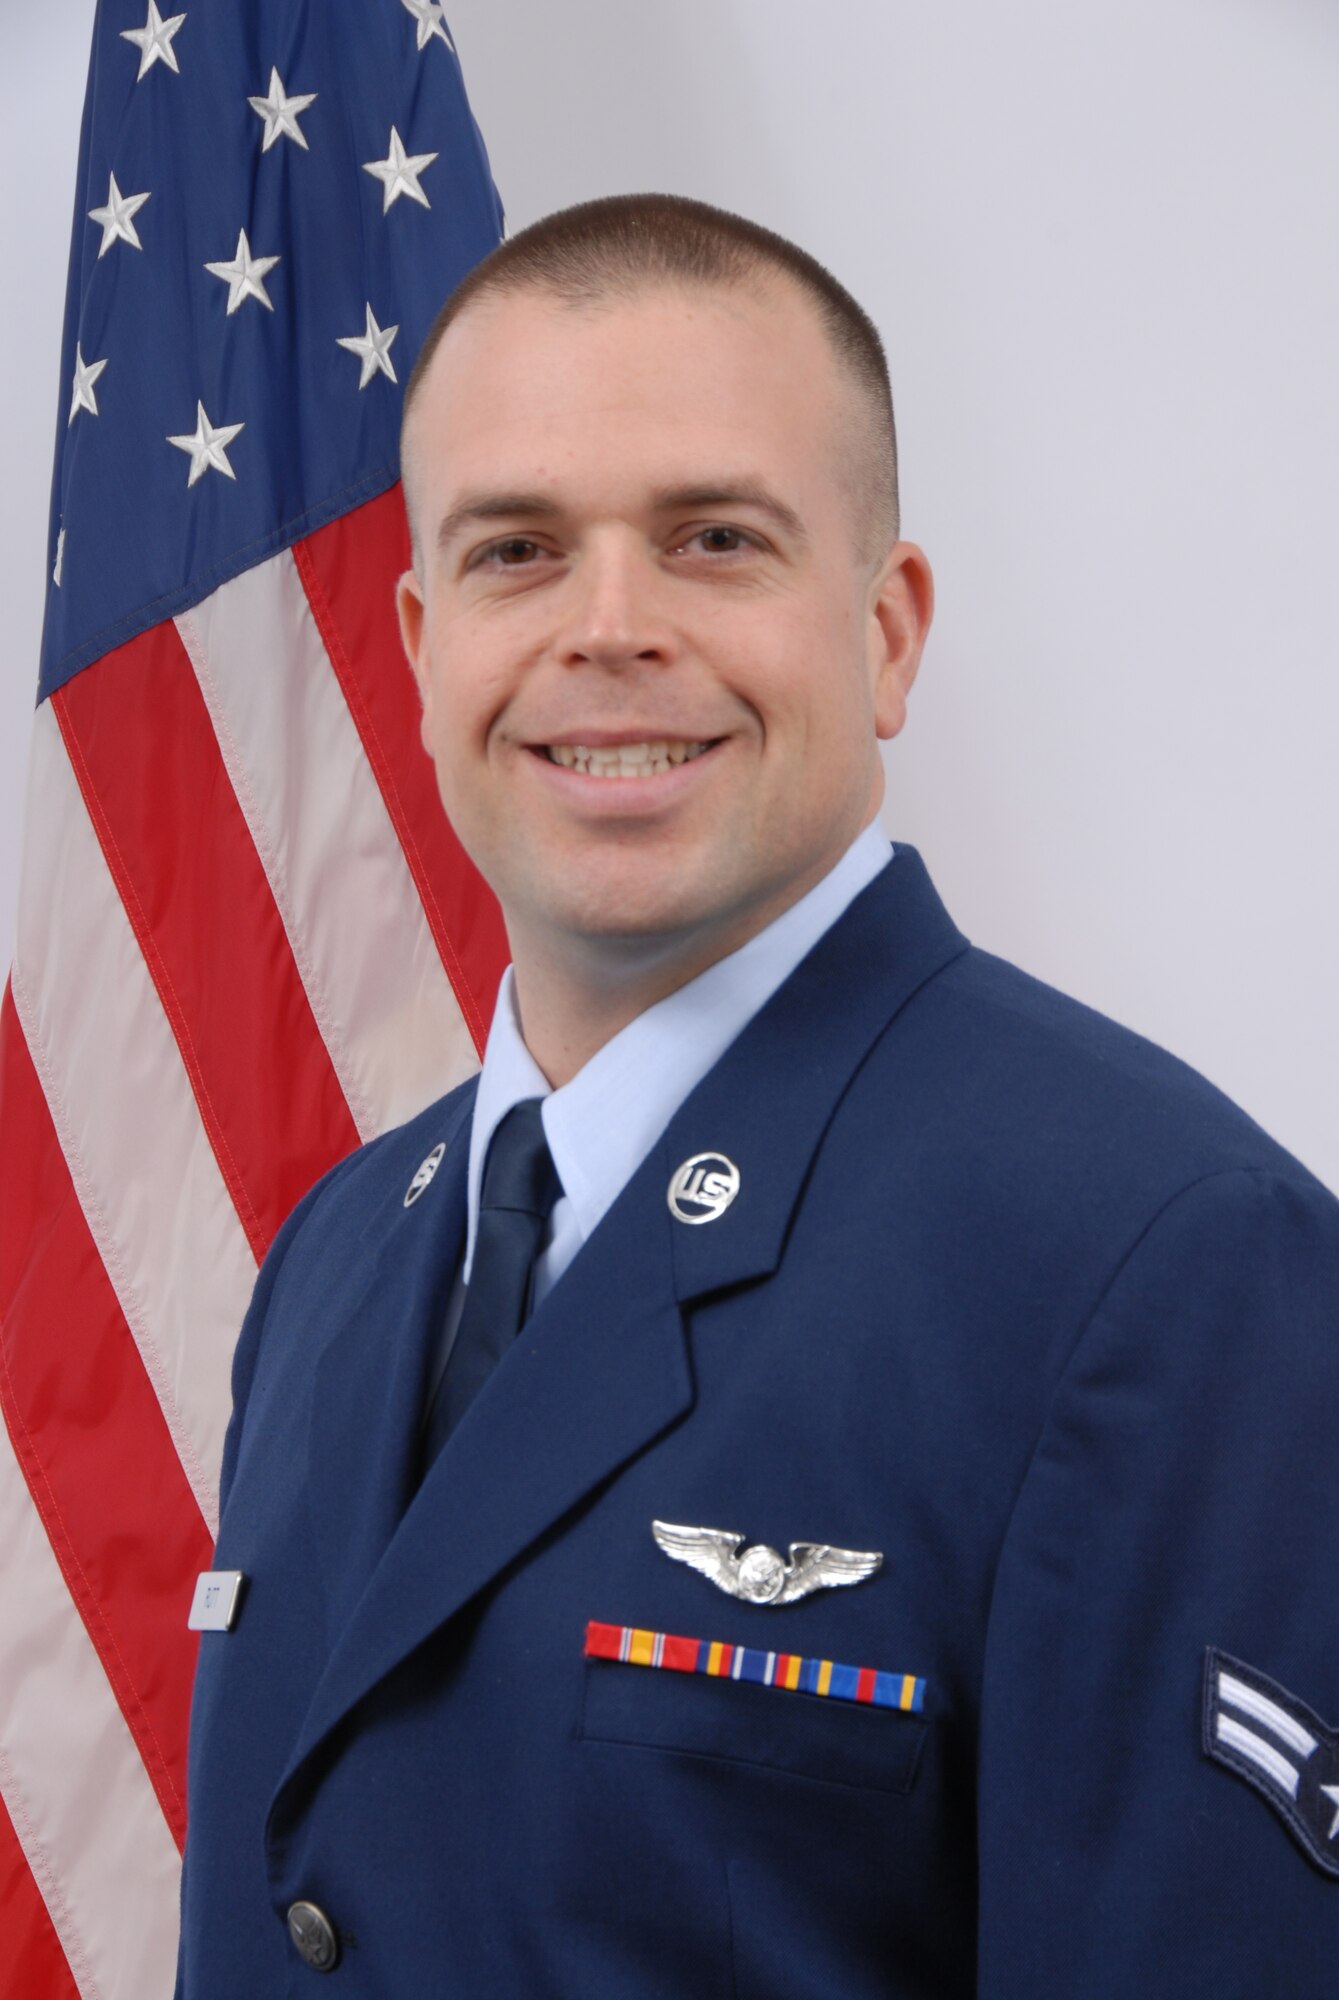 Senior Airman Mark Rutt, Delaware Air National Guard Outstanding Airman of the Year for 2008. Airman Rutt is a loadmaster, 142nd Airlift Squadron, and a resident of Newark, Del. (U.S. Air Force photo/Staff Sgt. Melissa Chatham, Delaware Air National Guard)